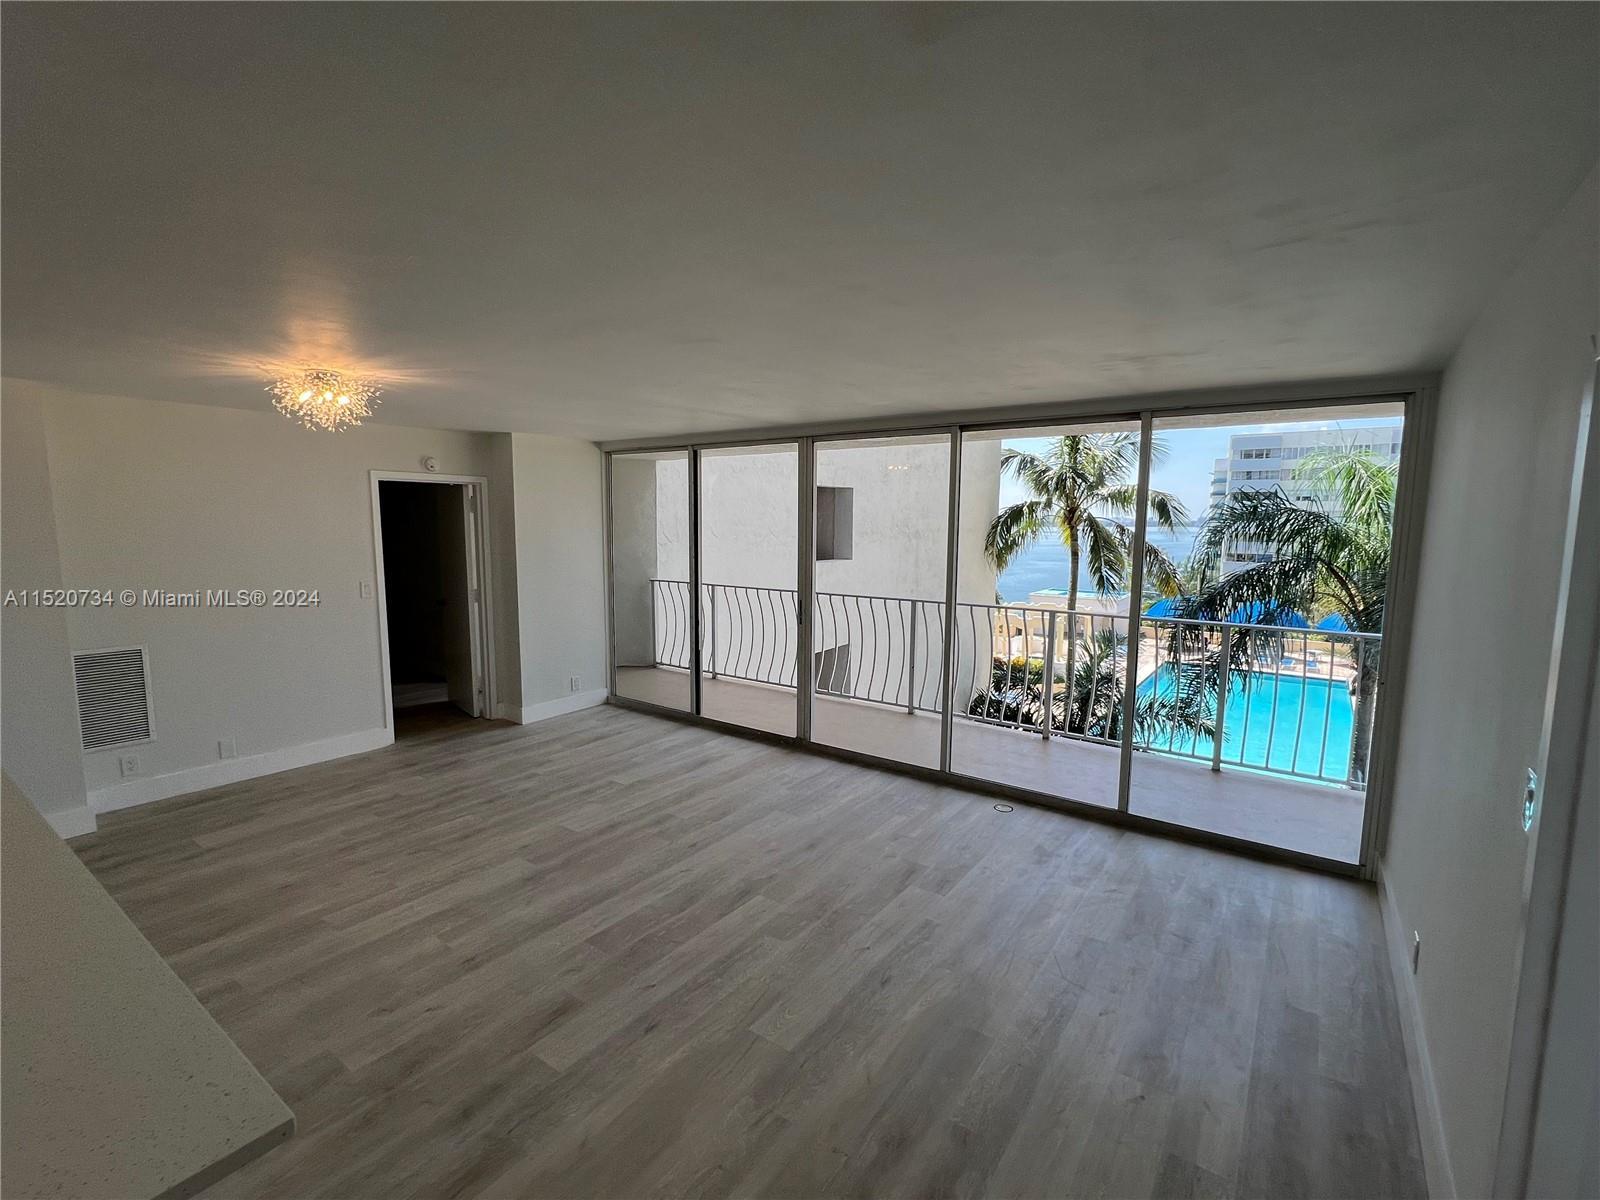 Beautifully remodeled 2bed/2bath unit with water views overlooking renovated swimming pool & tropica